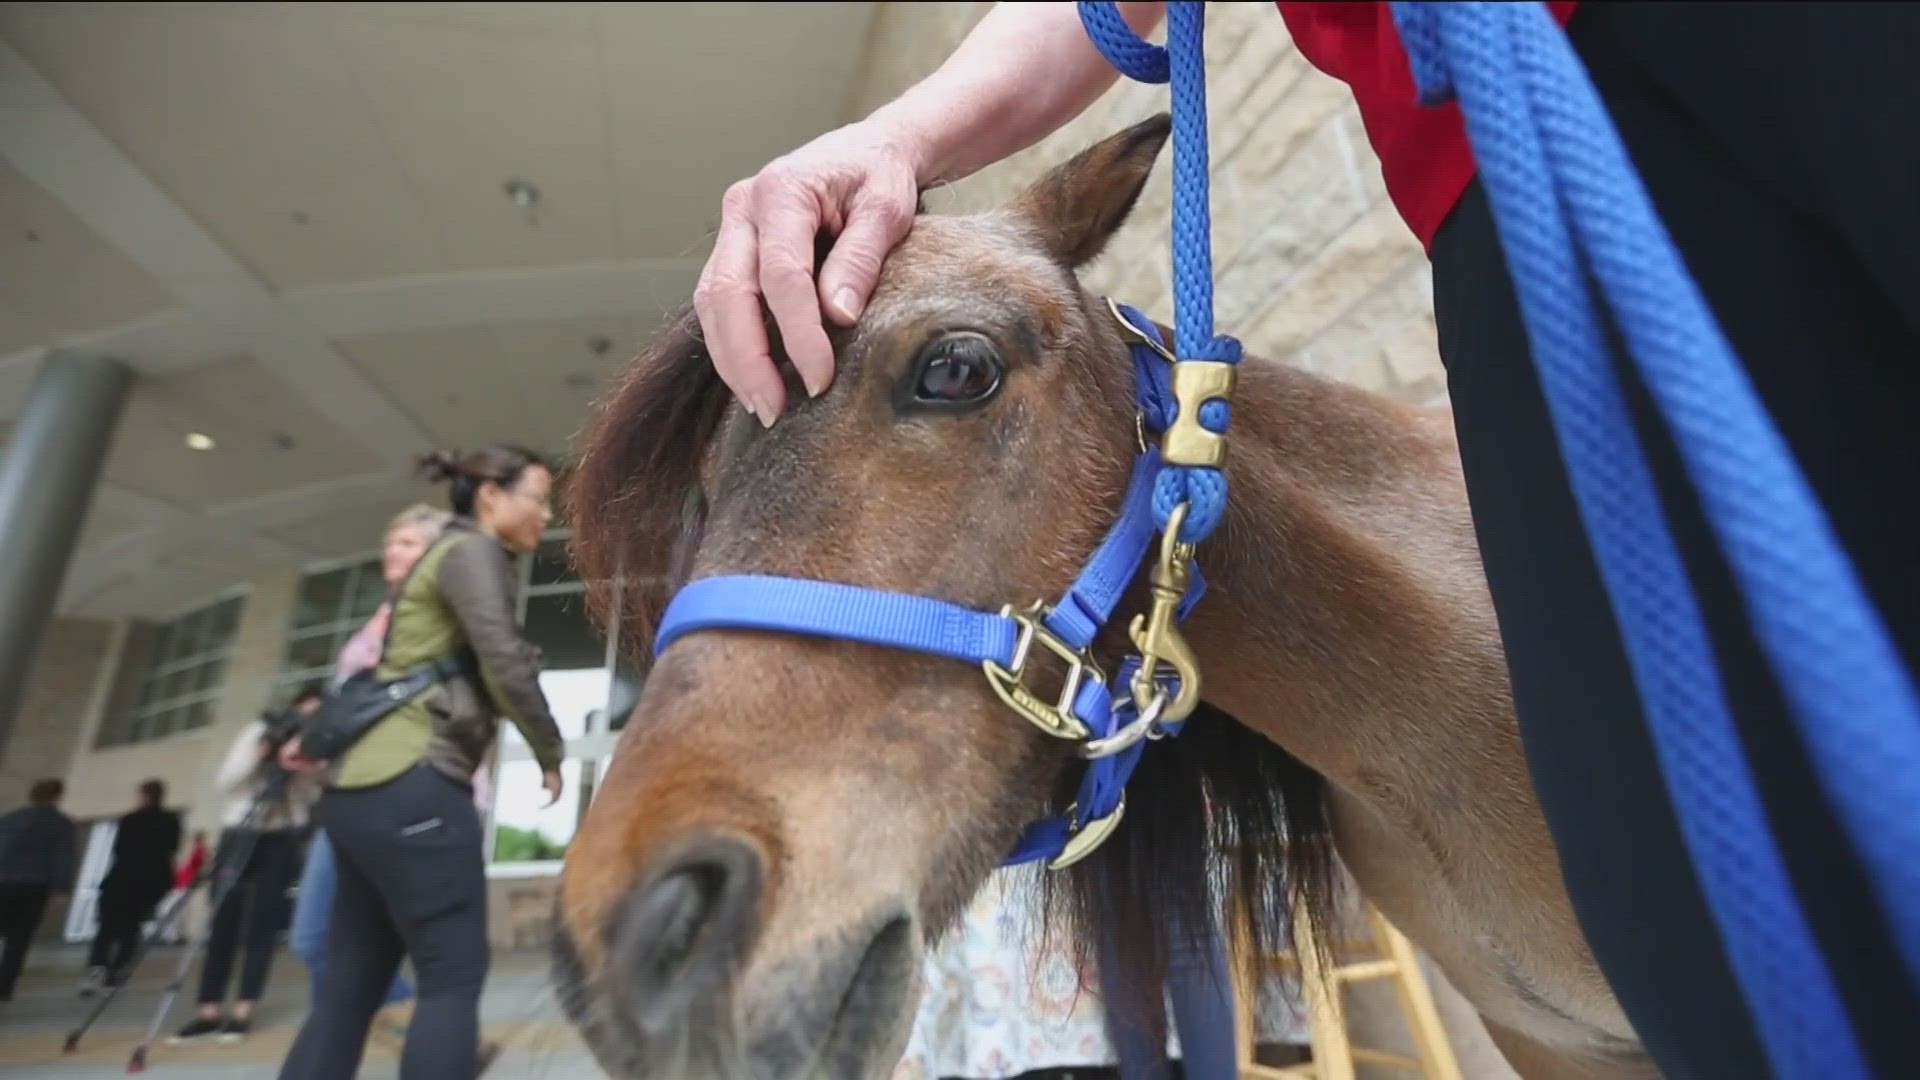 Mini Joys Inc. was founded by Laurie Bell in 2009. The nonprofit uses miniature horses to spread joy, comfort, and connection.